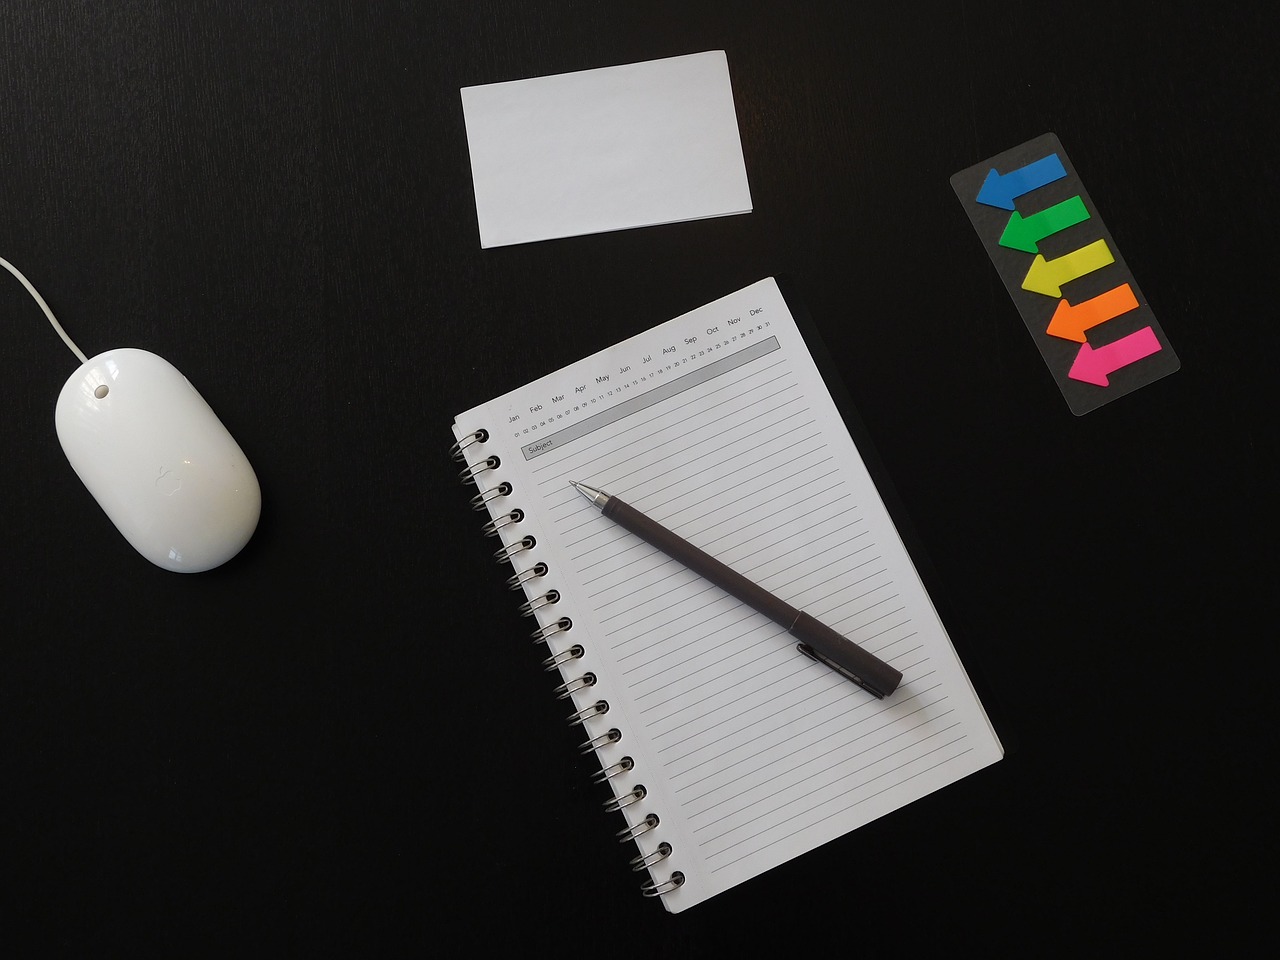 Overhead shot of black desktop with mouse, blank agenda and pen, flashcards, and sticky notes on it